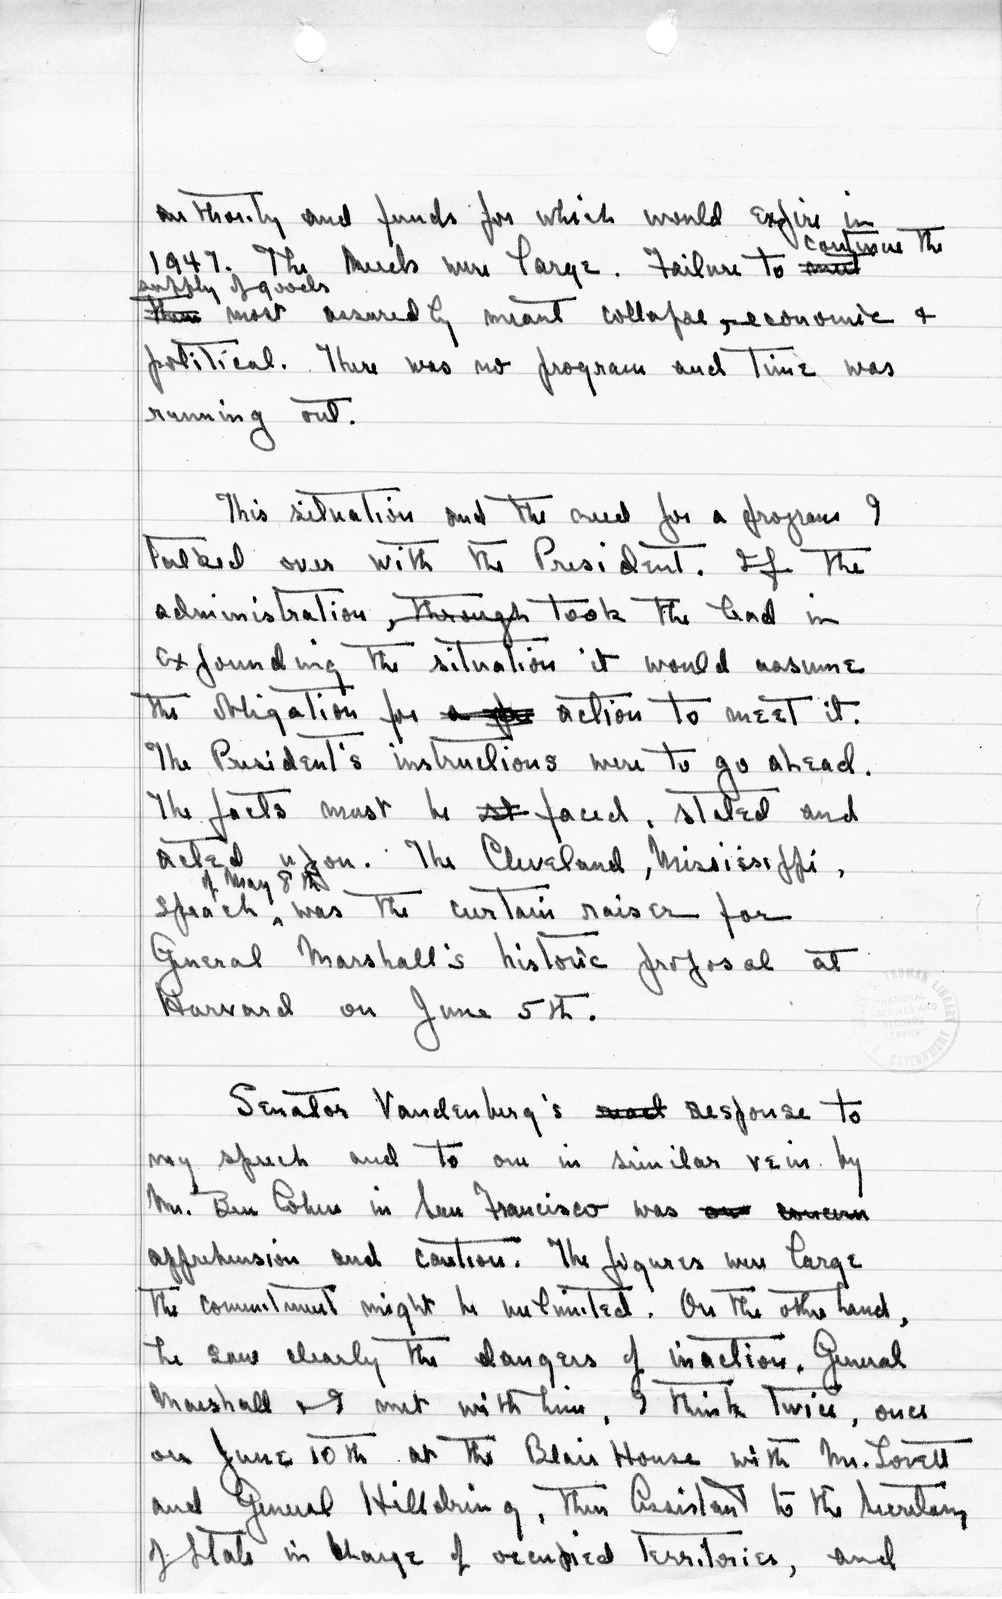 Handwritten Notes from Princeton Seminar Discussion, Reel 1, Insert B